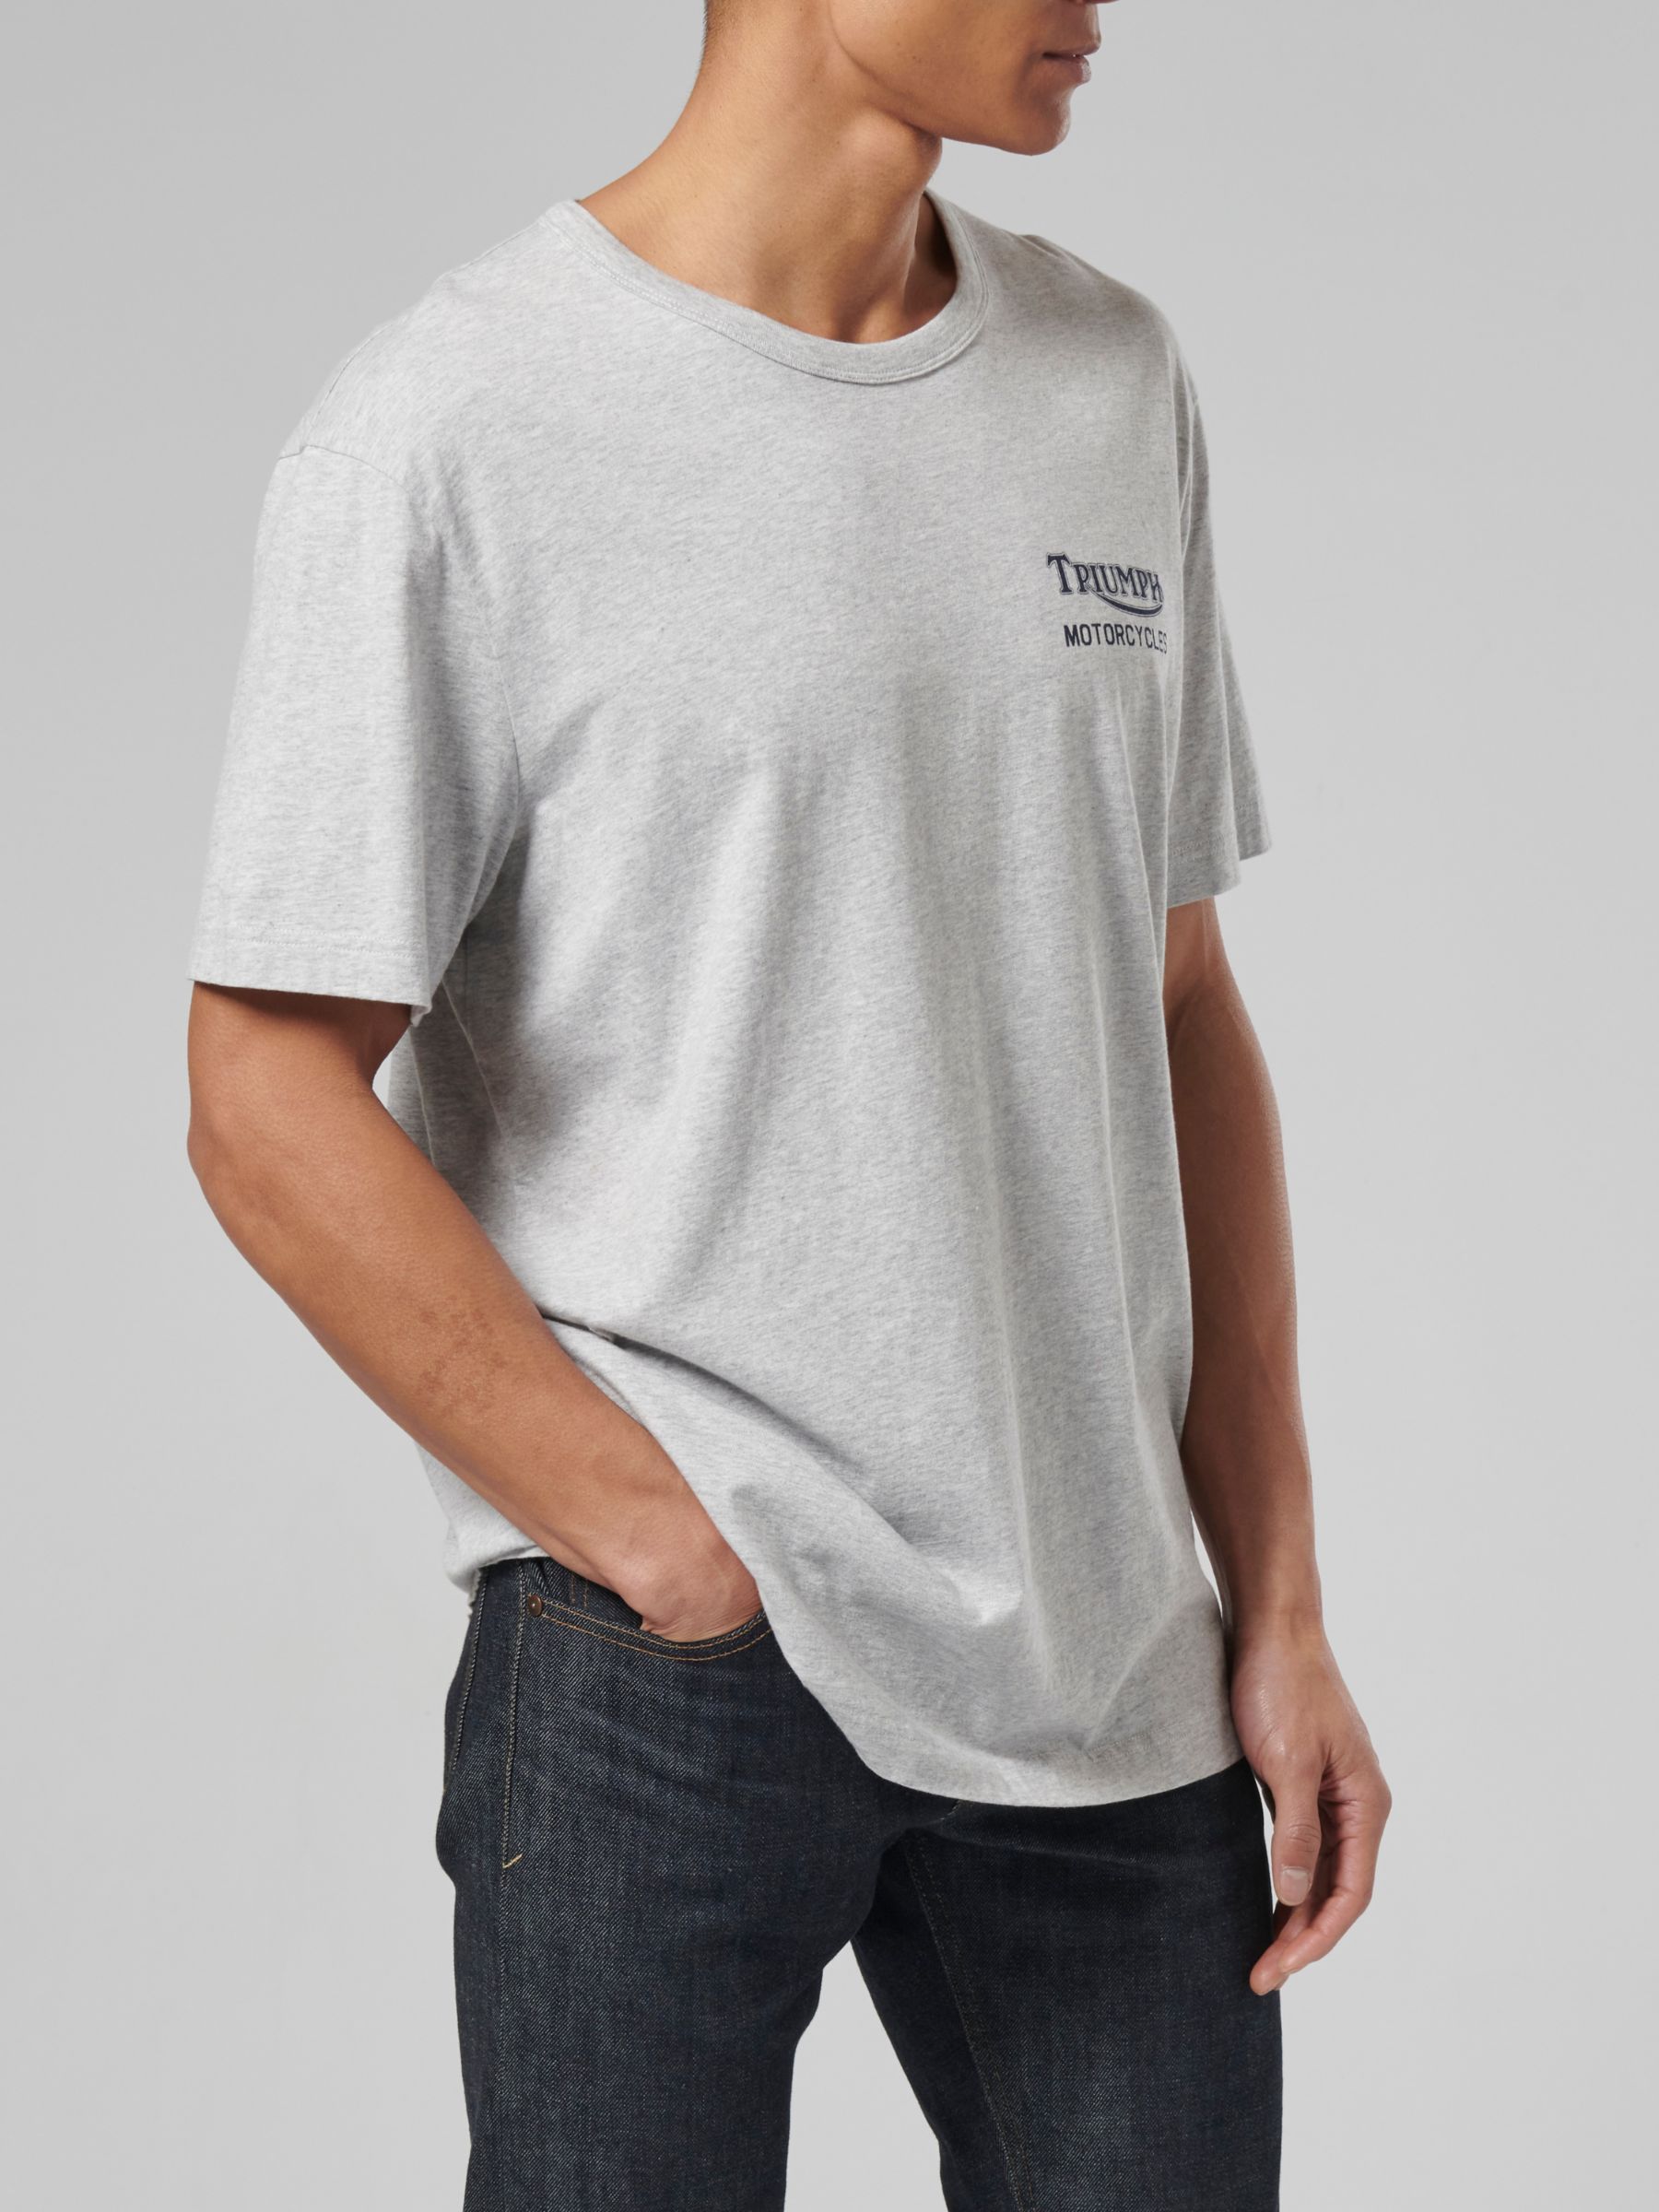 Buy Triumph Motorcycles Adcote T-Shirt Online at johnlewis.com